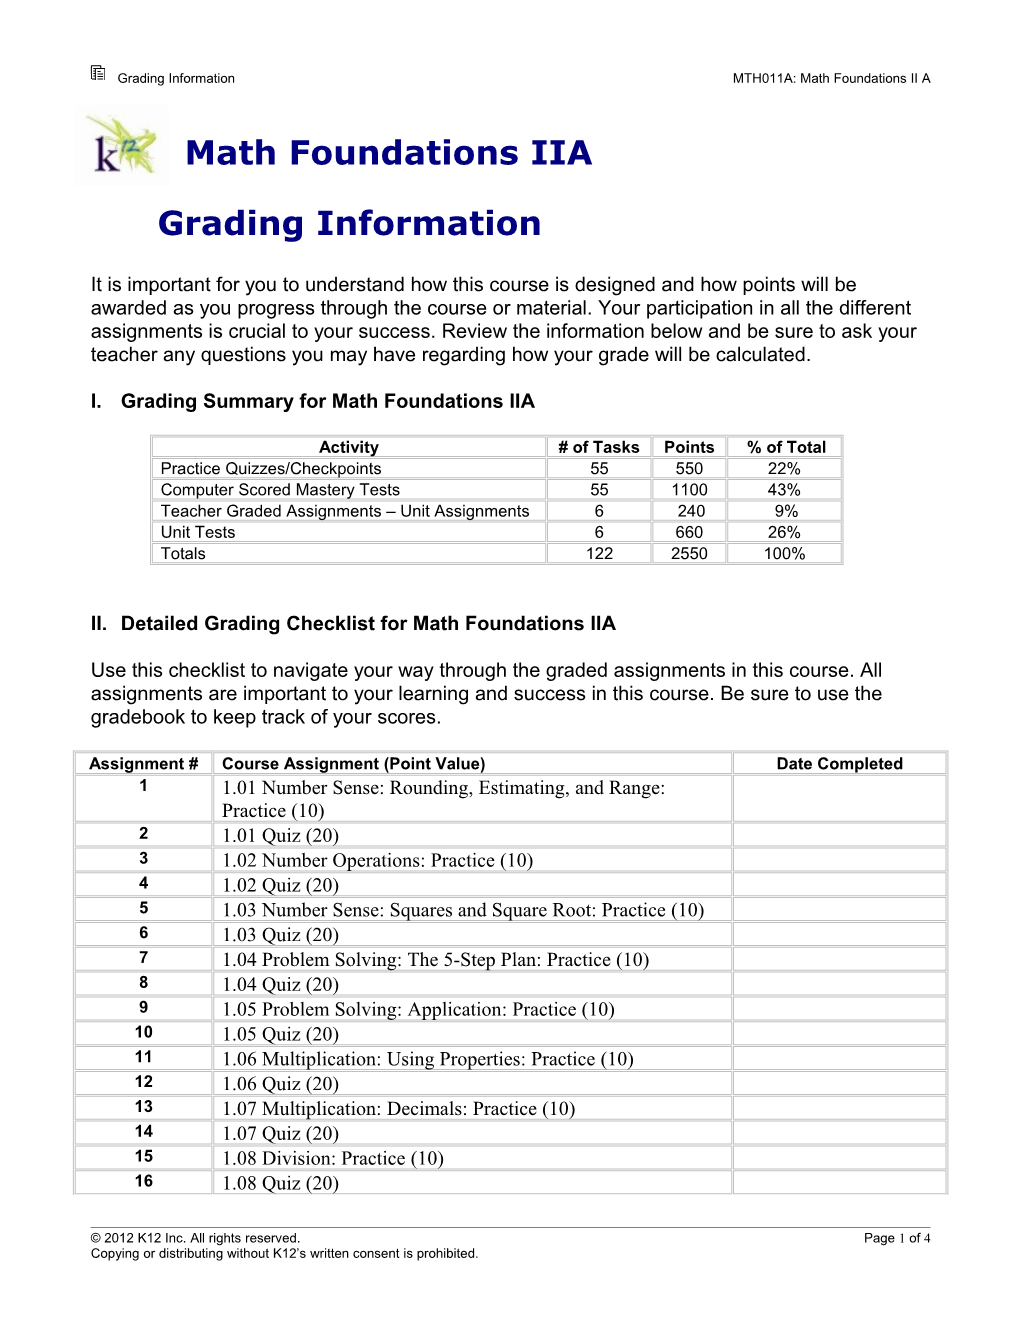 Course Name Grading Information